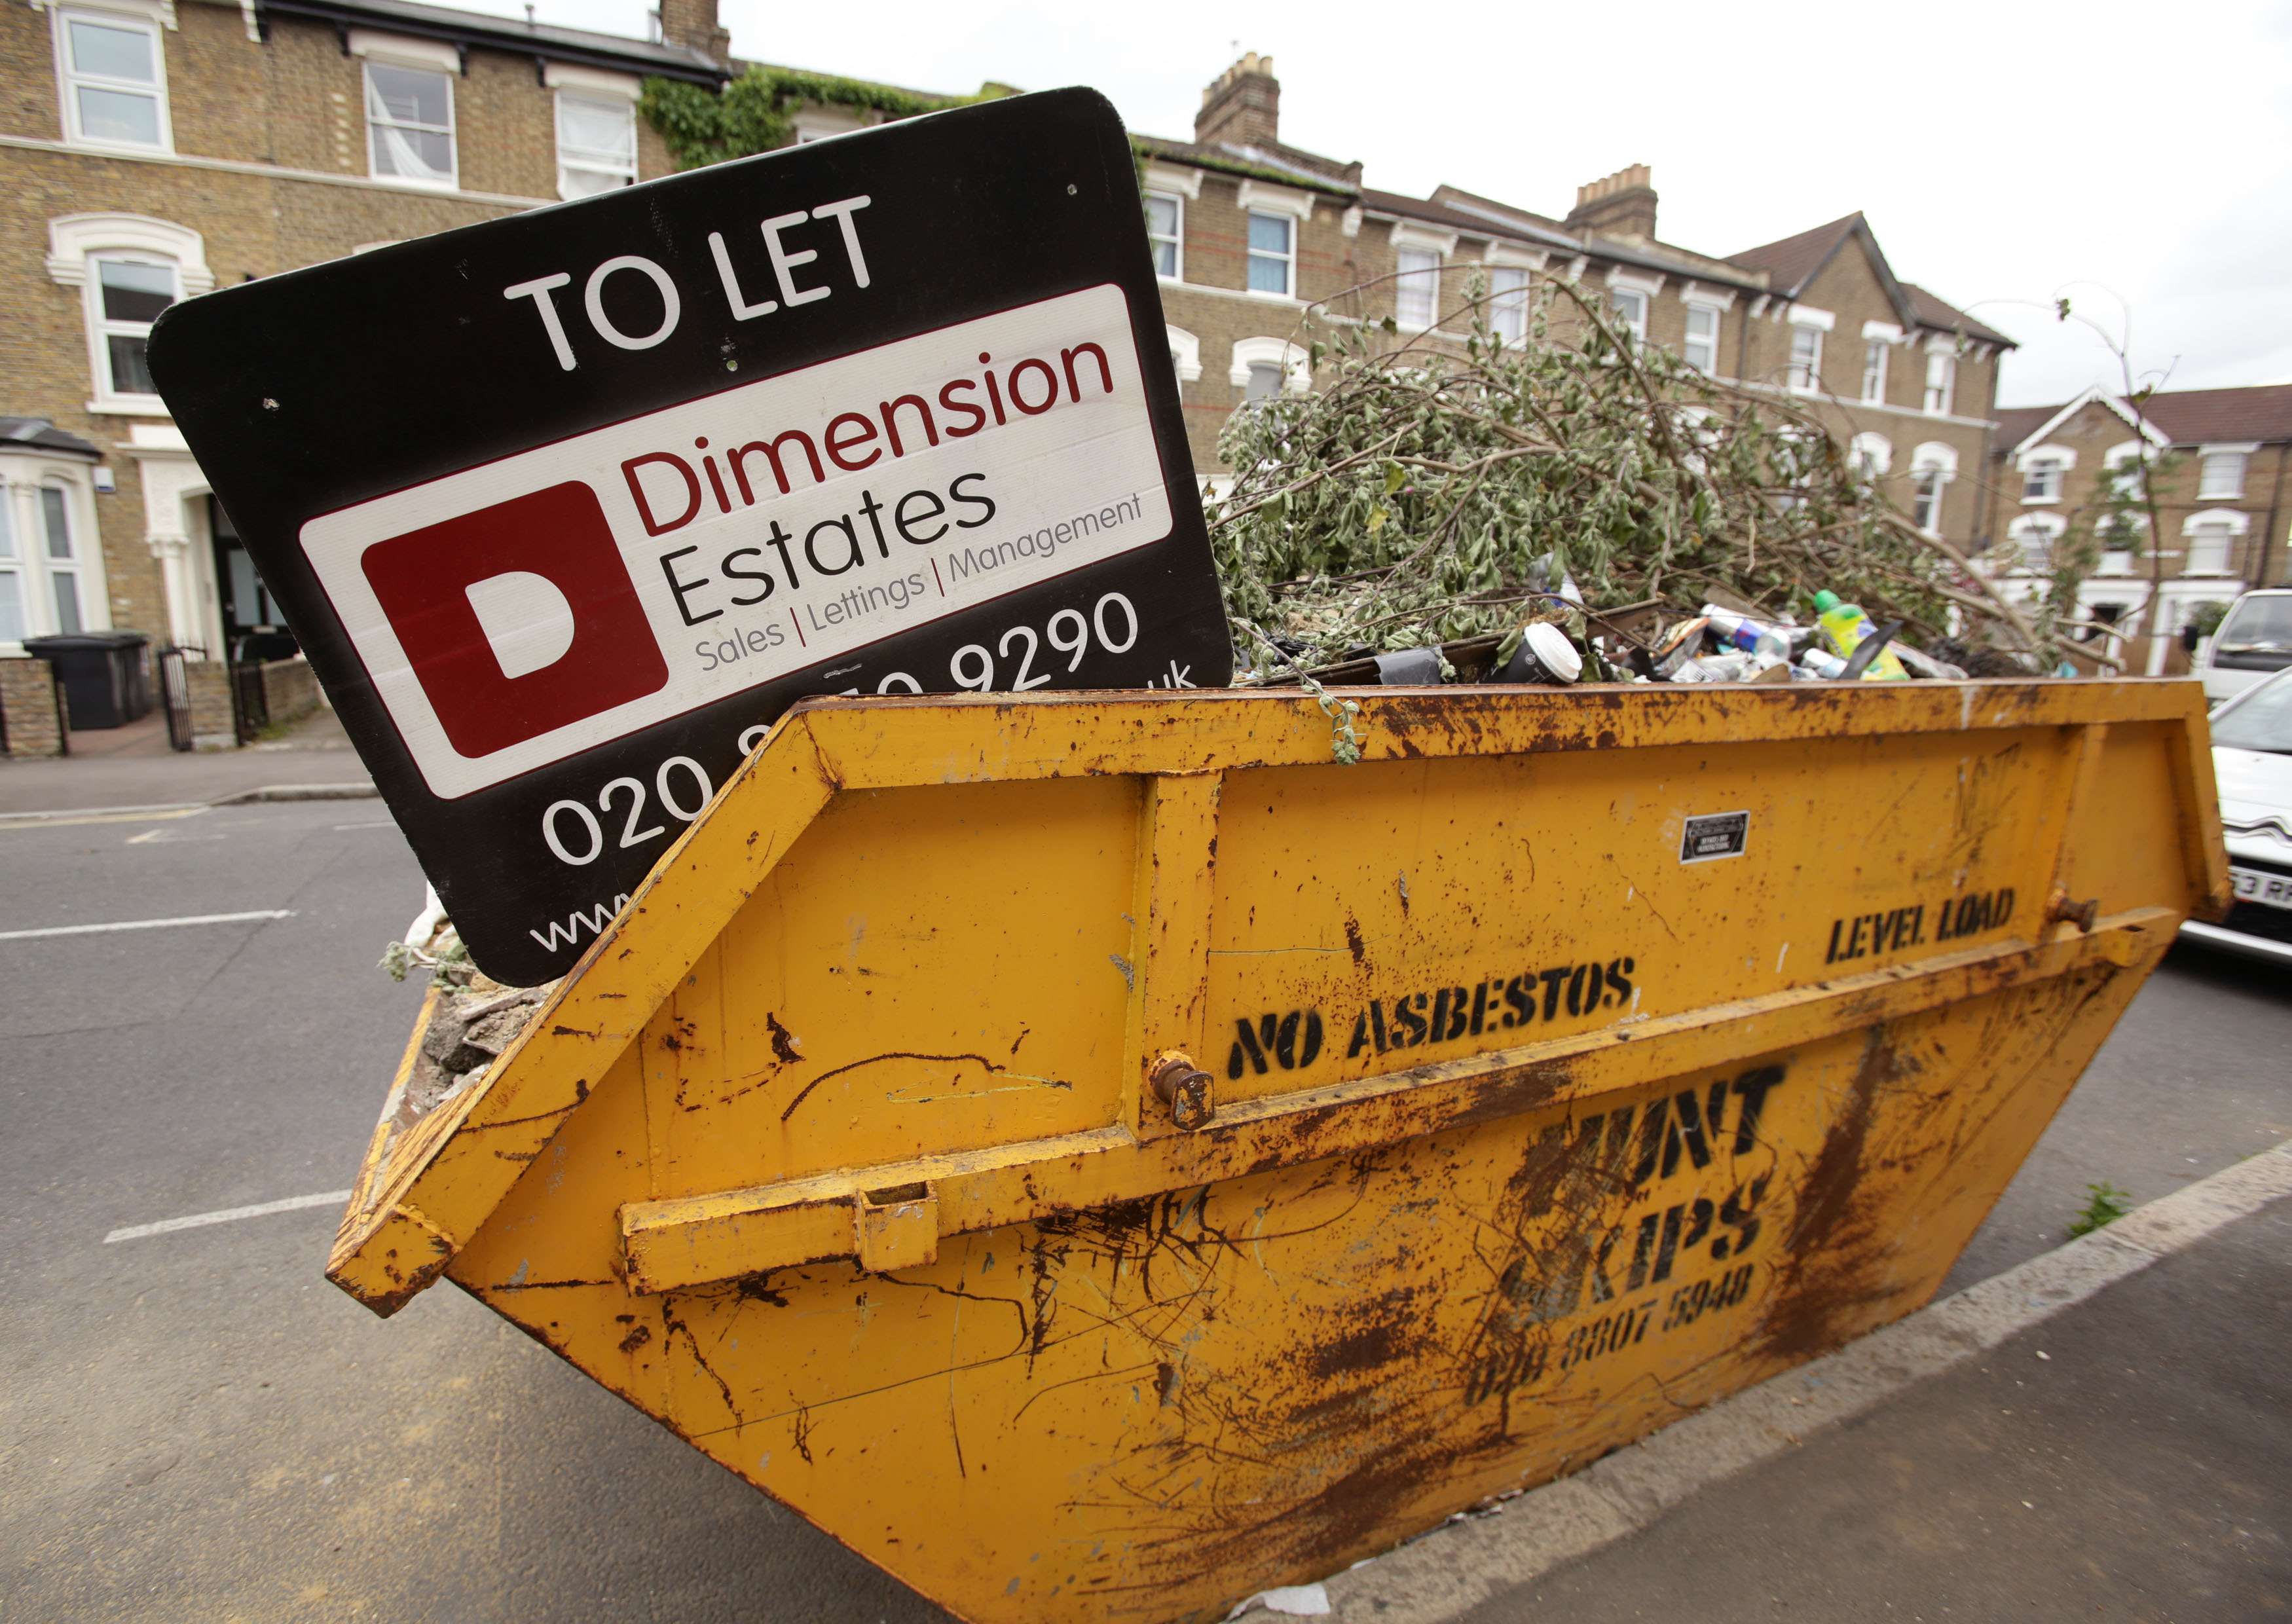 A skip, similar to the type provided by the company Gary Johnson doesn't run